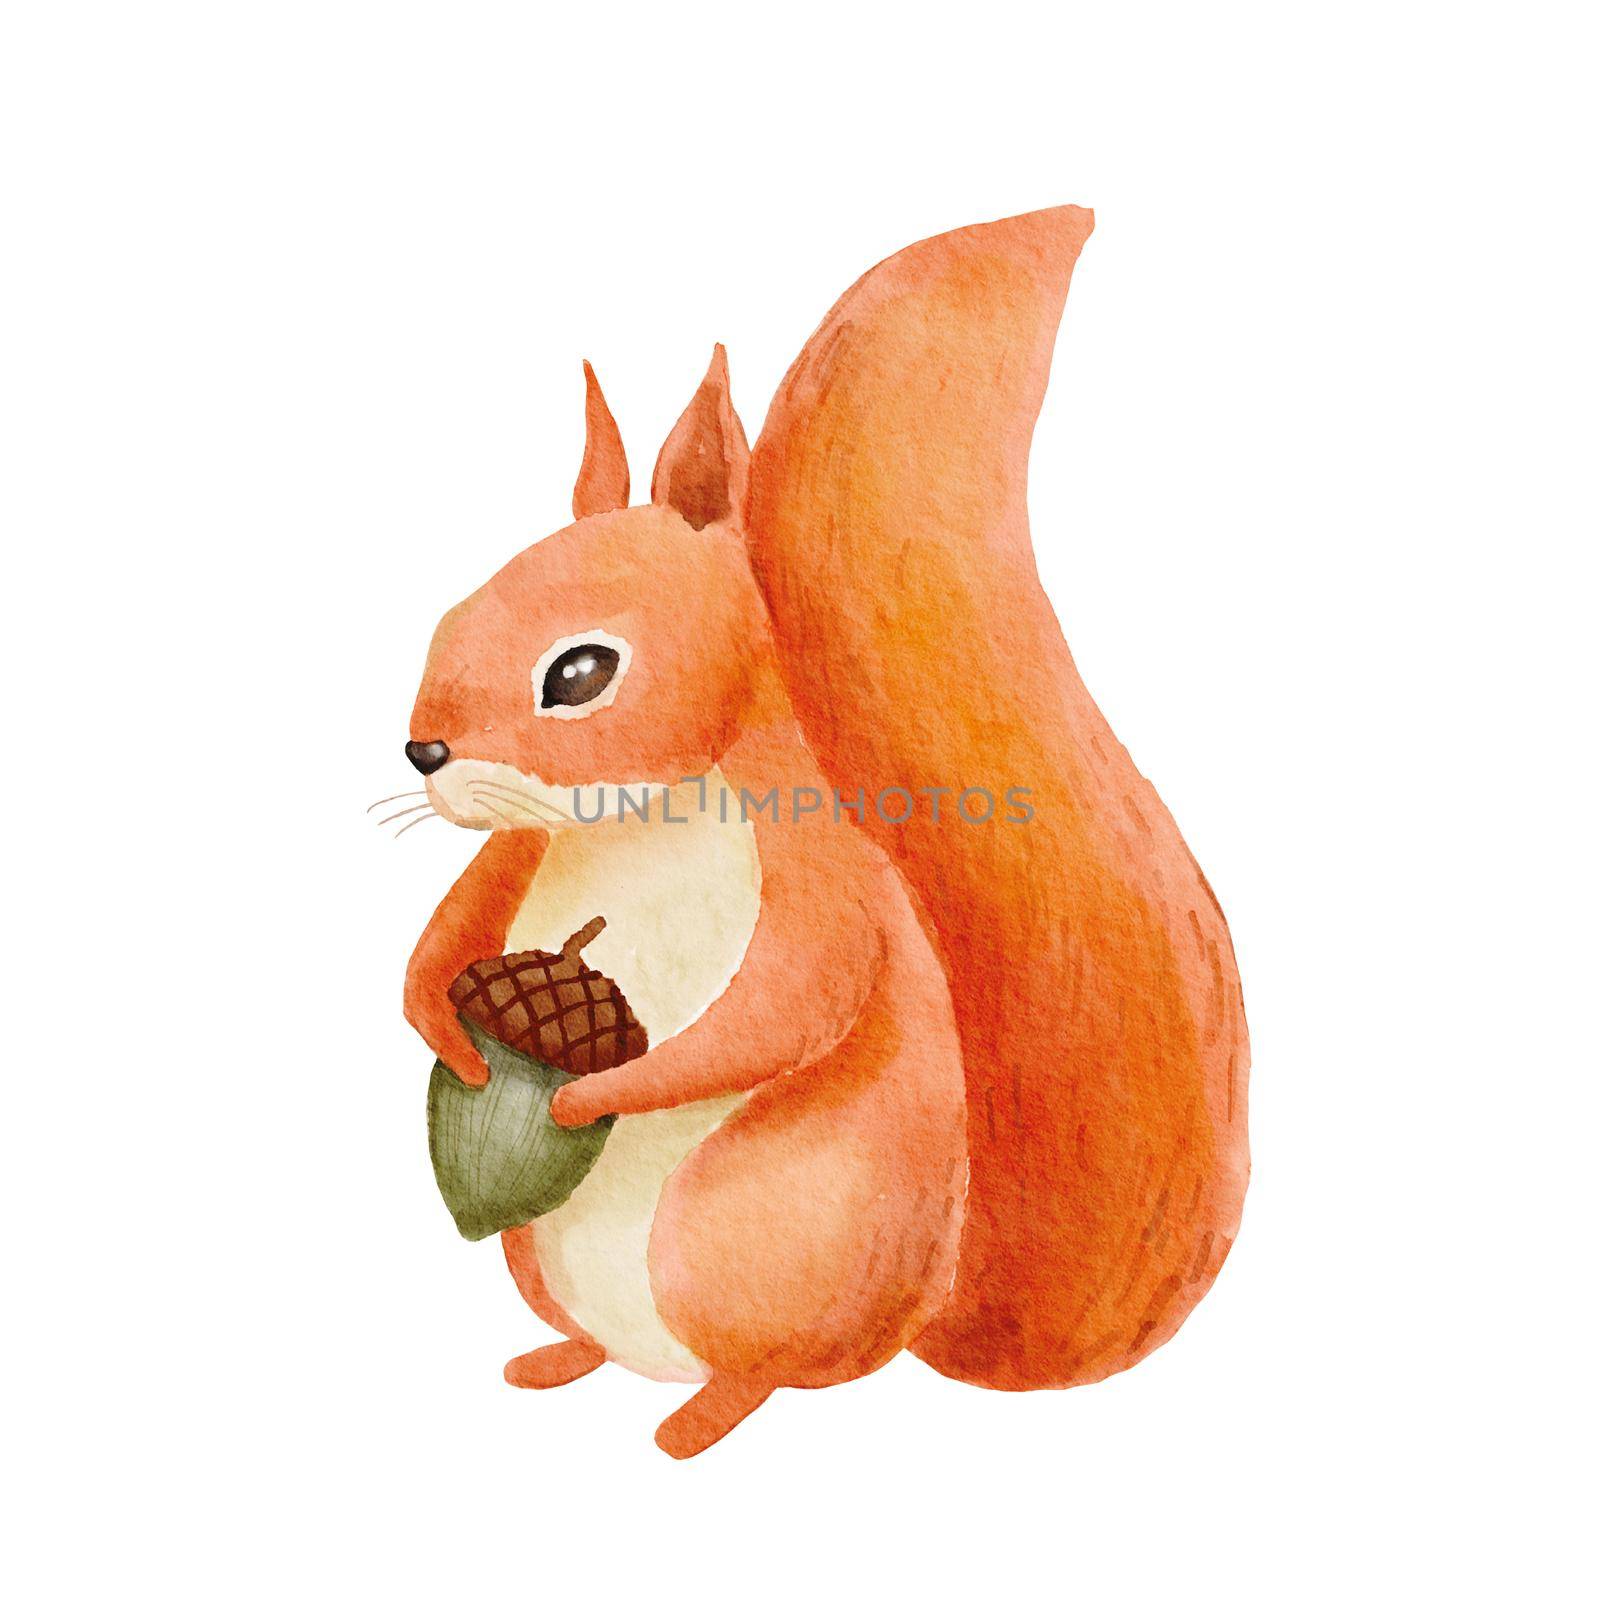 Illustration of watercolor cute red squirrel. Hand drawn character forest animal isolated on white background. Woodland fall illustration by ElenaPlatova